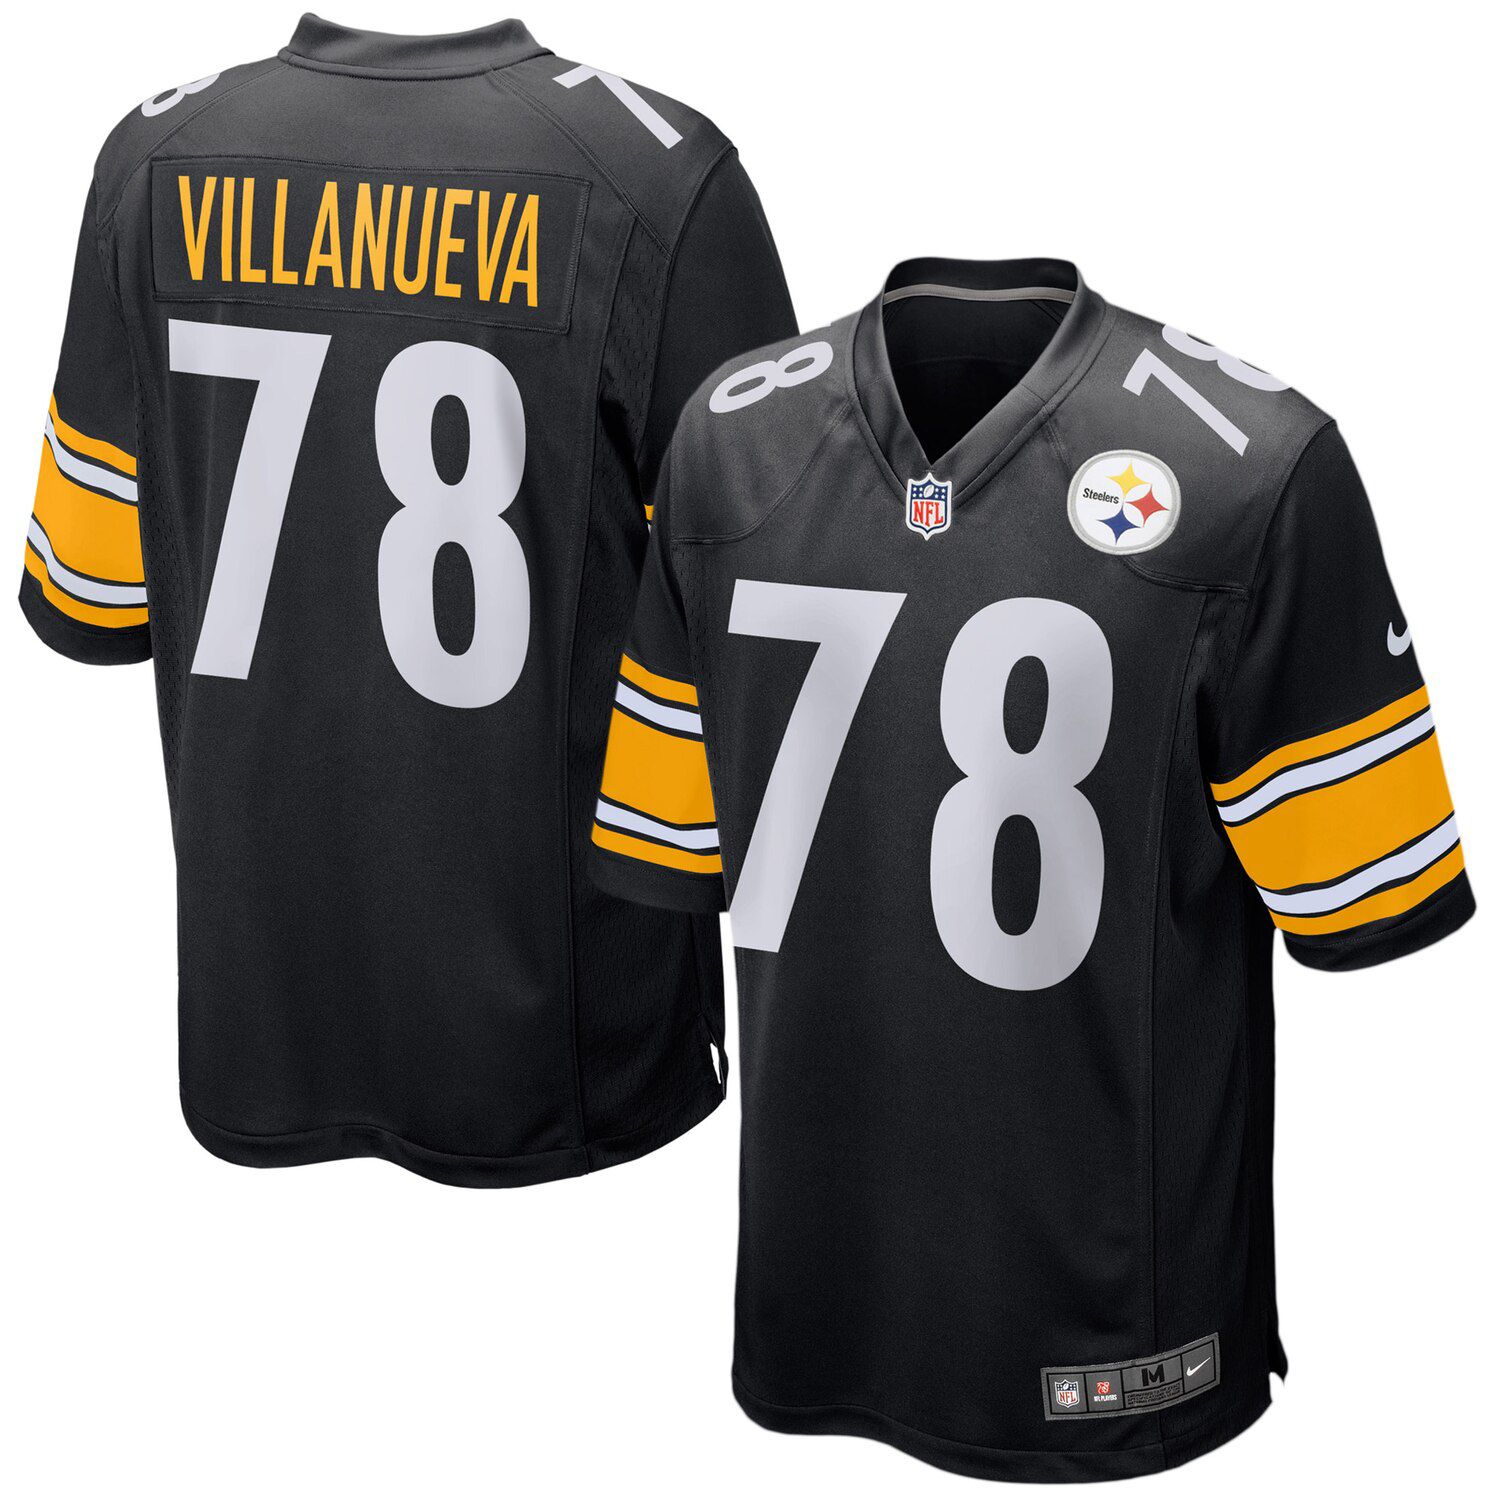 Black Pittsburgh Steelers Game Jersey